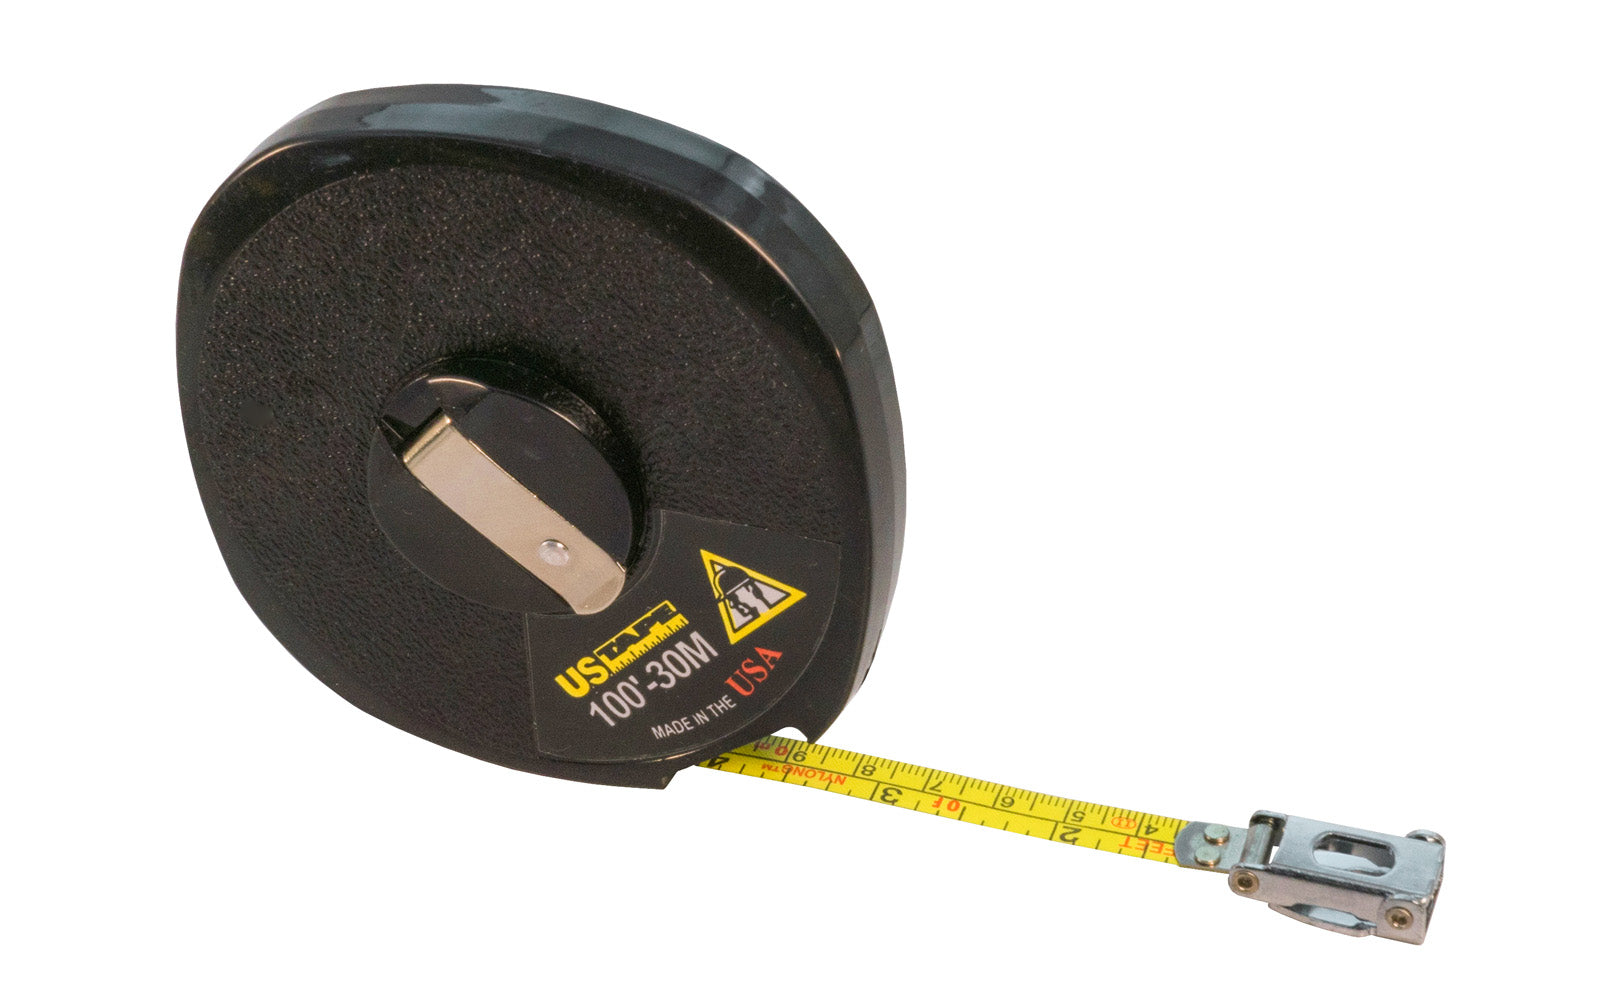 3/8" x 100'/30m U.S. Tape Contractor Series Tape Measure. US Tape Model 58655. Made in USA. 727659586555. Contractor Series Long Measuring Tapes feature a closed reel design with a hand rewind crank that folds into the hub. The case is made of tough ABS plastic.  Made in USA.